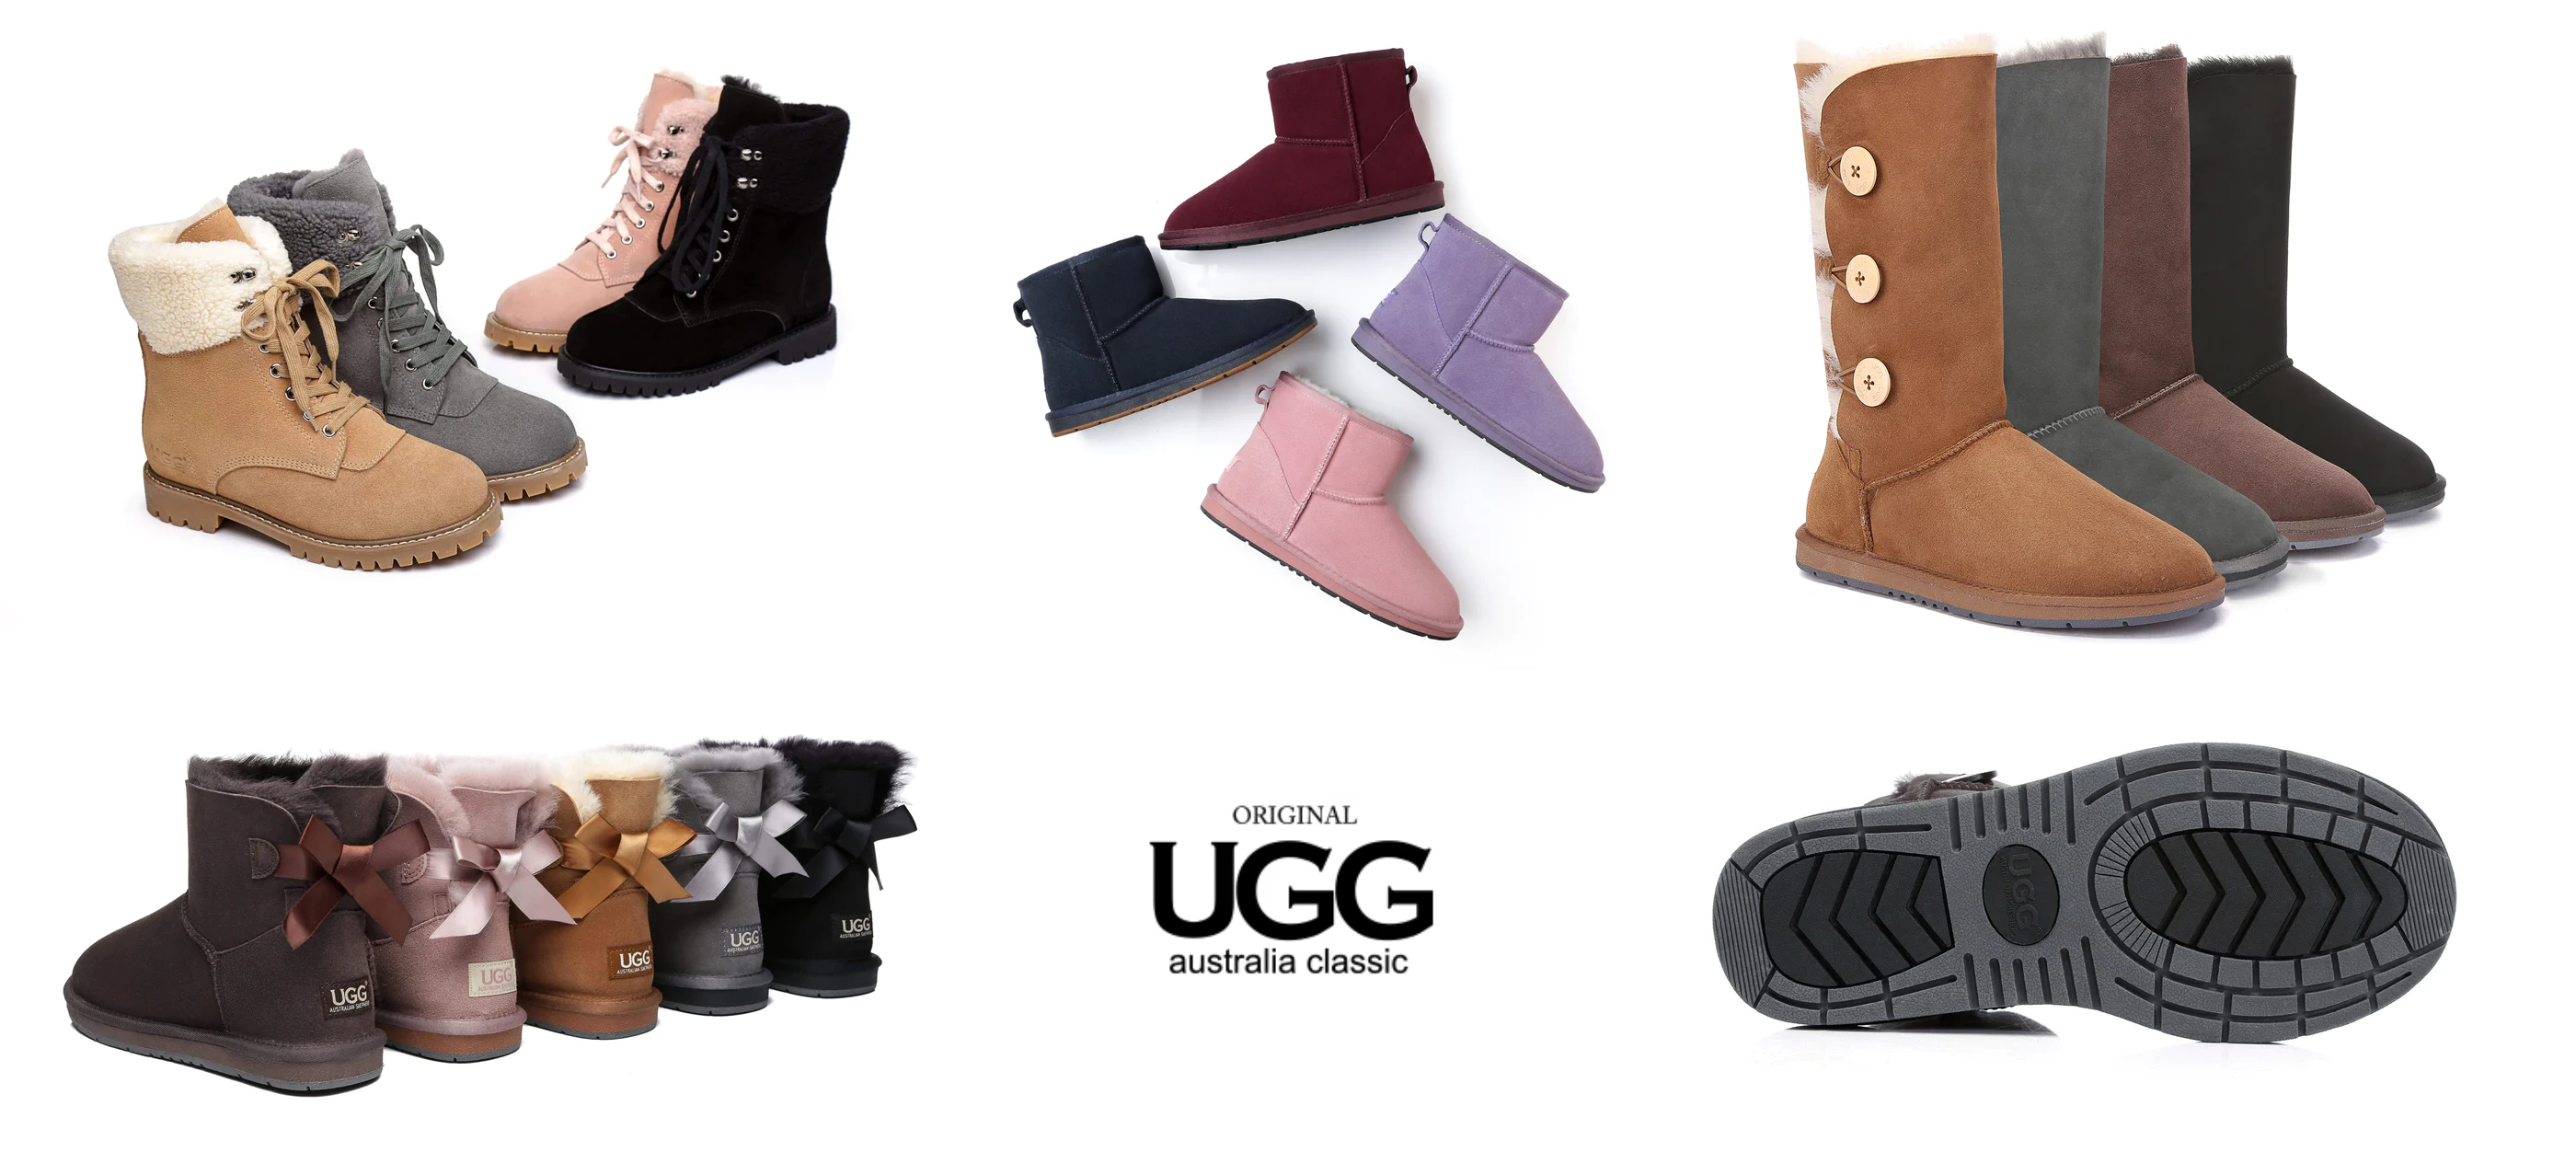 Ugg Boots - A Deep Dive into their Craftsmanship and Durability